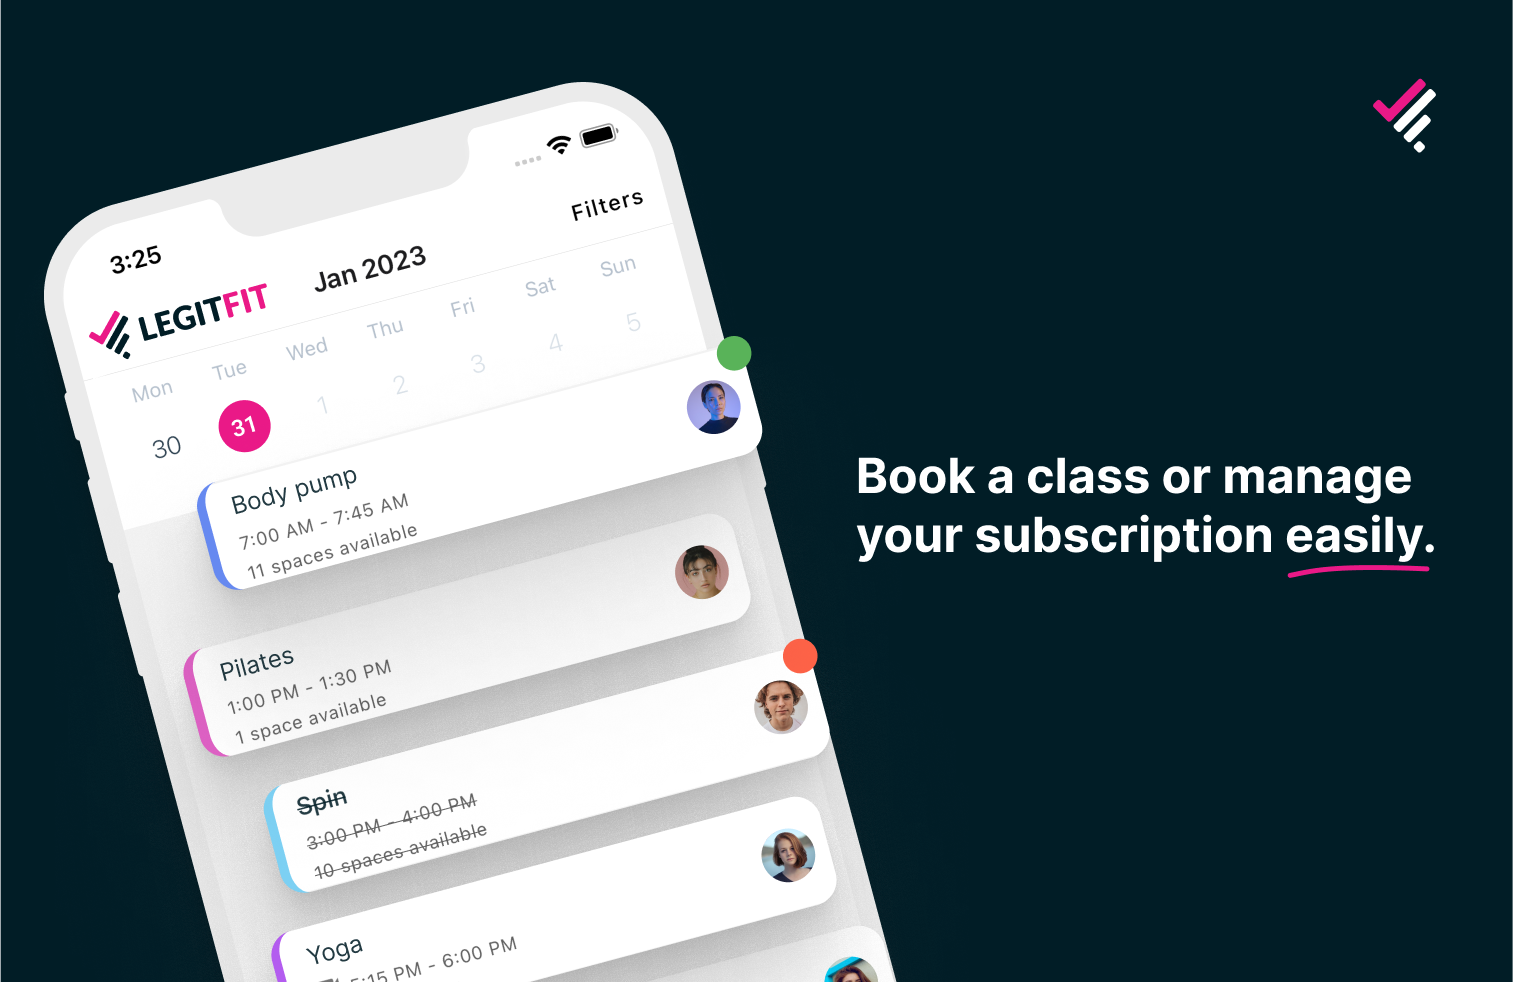 Remove the hassle of class booking with an automated booking software